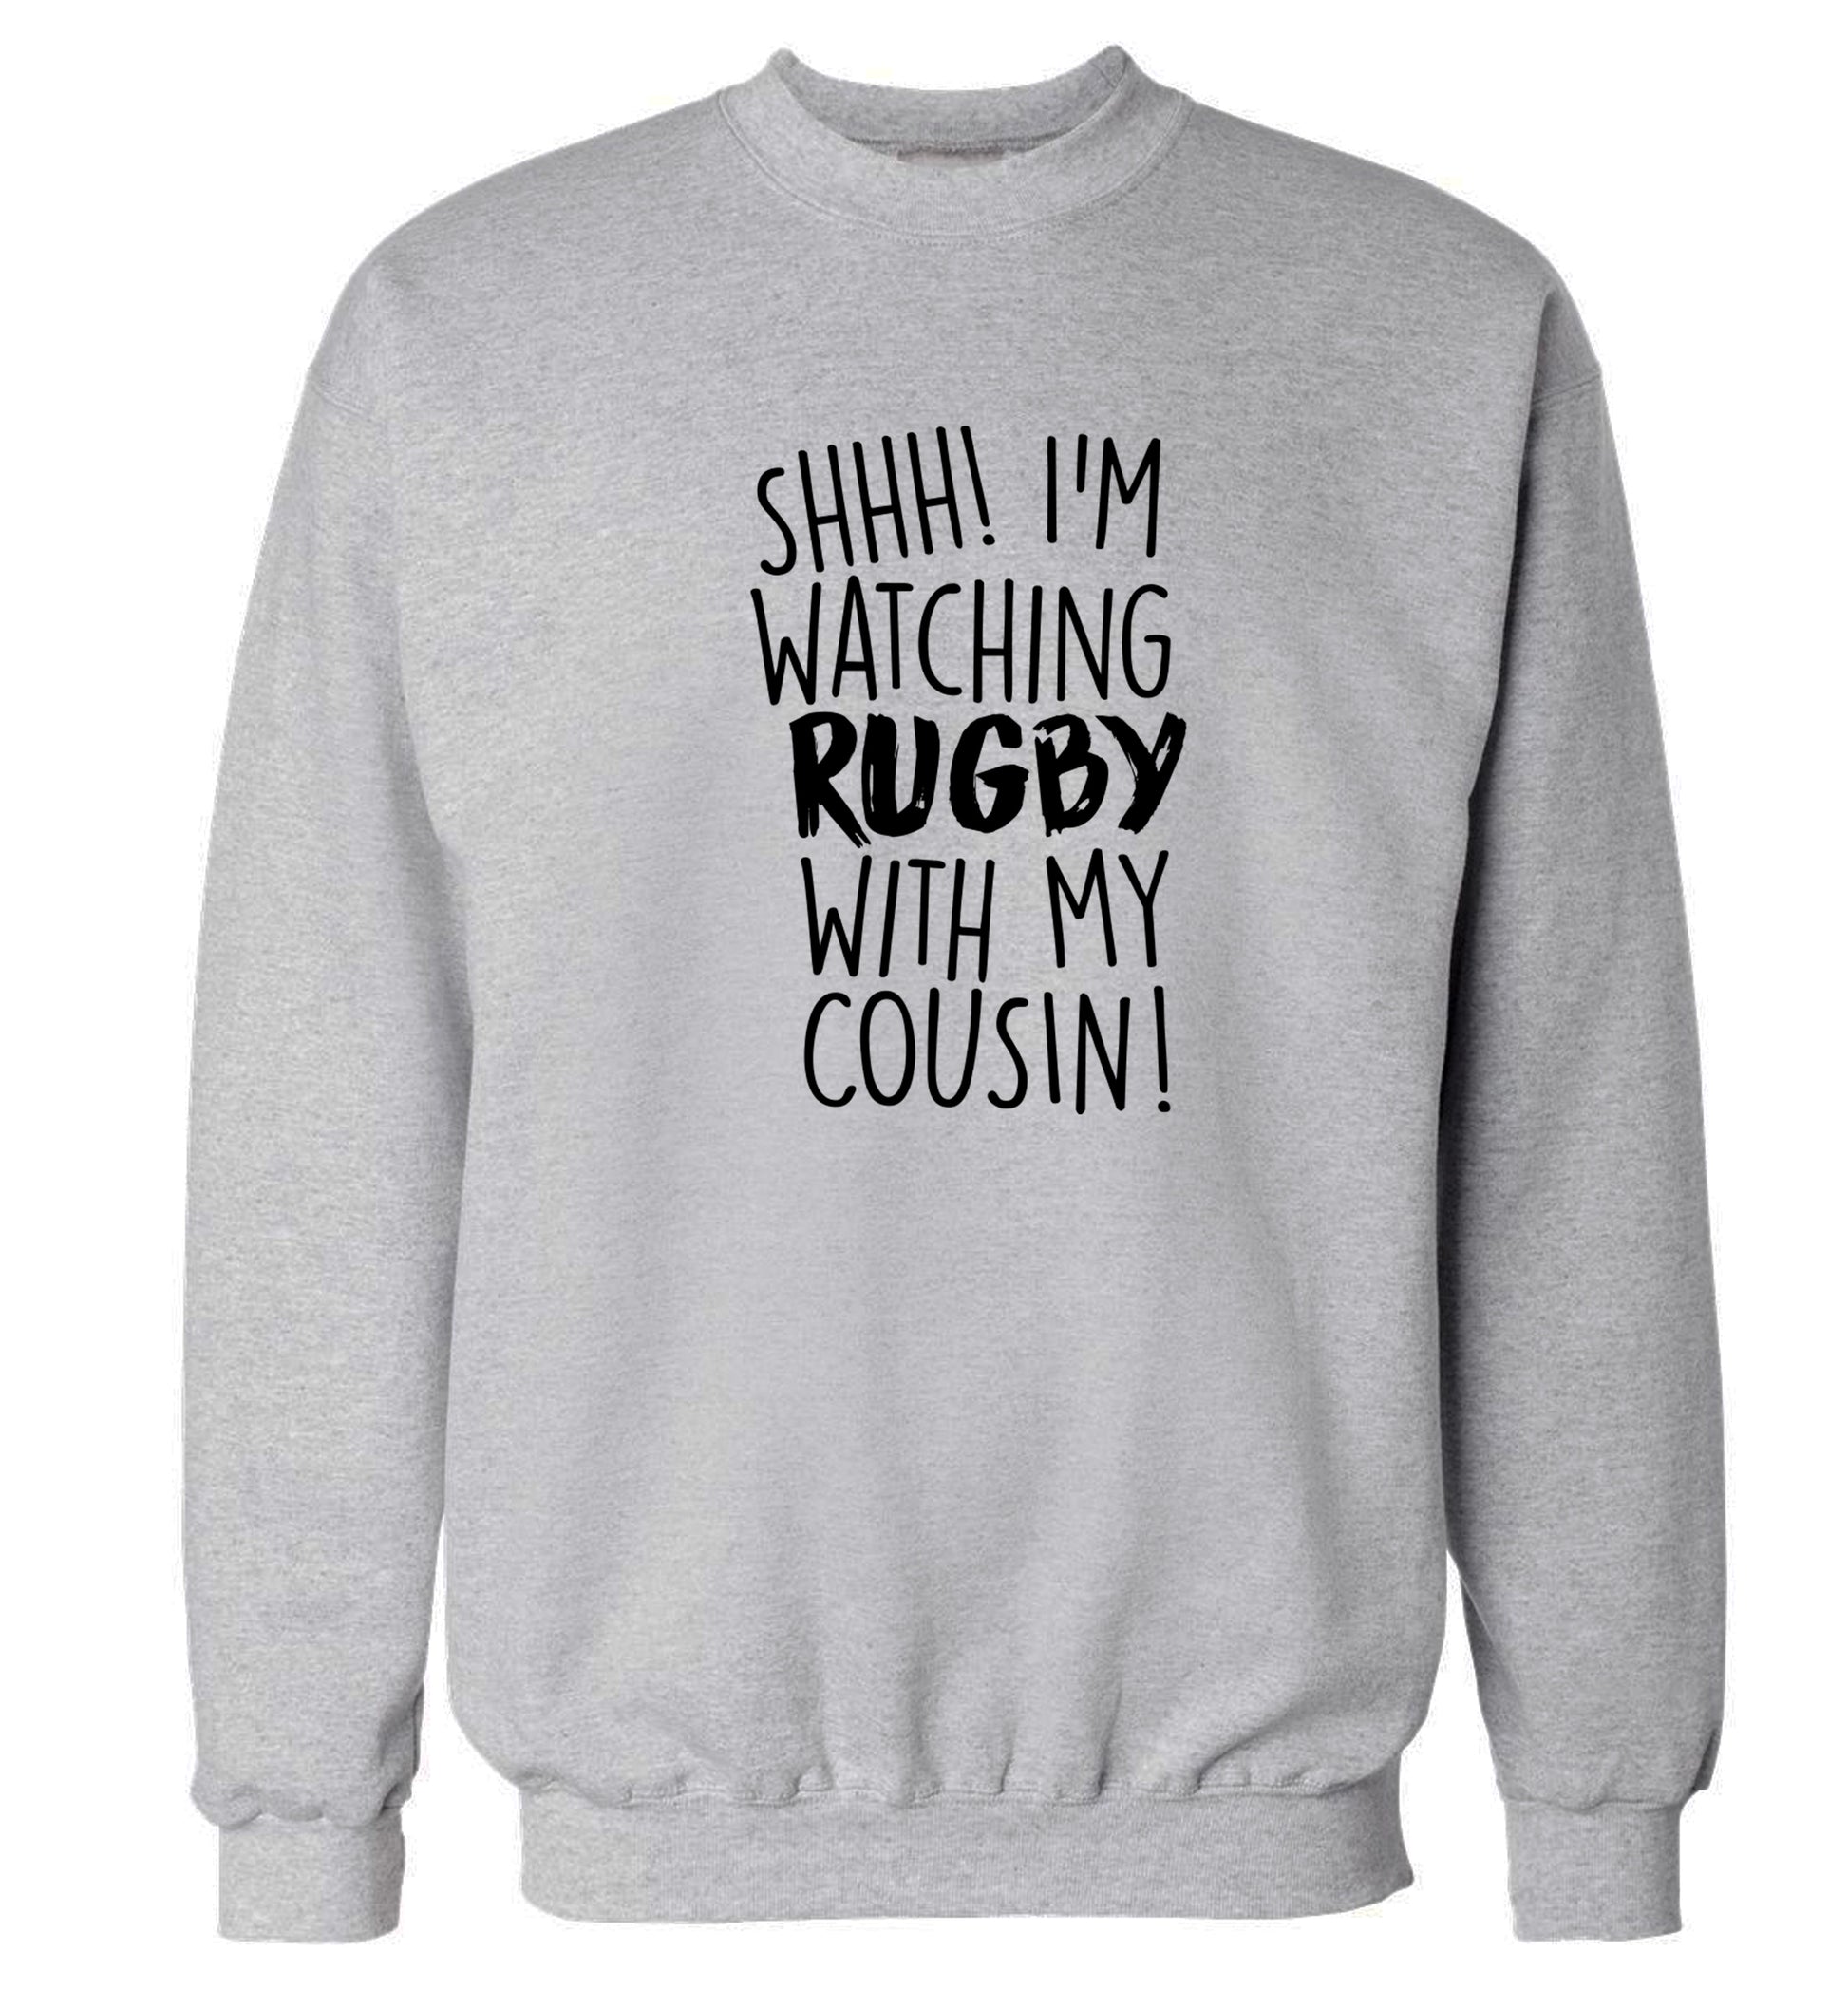 Shhh I'm watching rugby with my cousin Adult's unisex grey Sweater 2XL